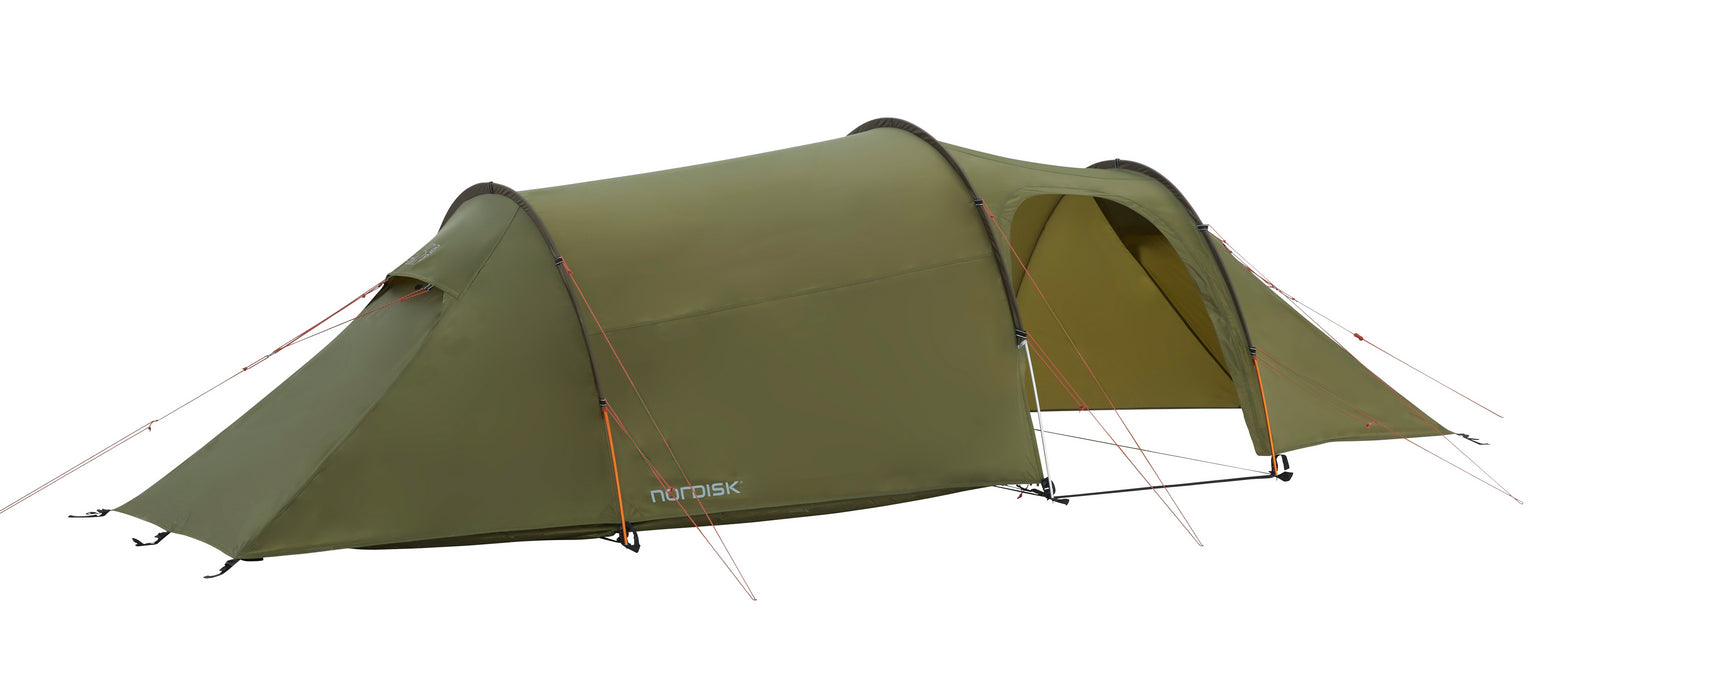 Nordisk Oppland 2 PU Tent (2.0)